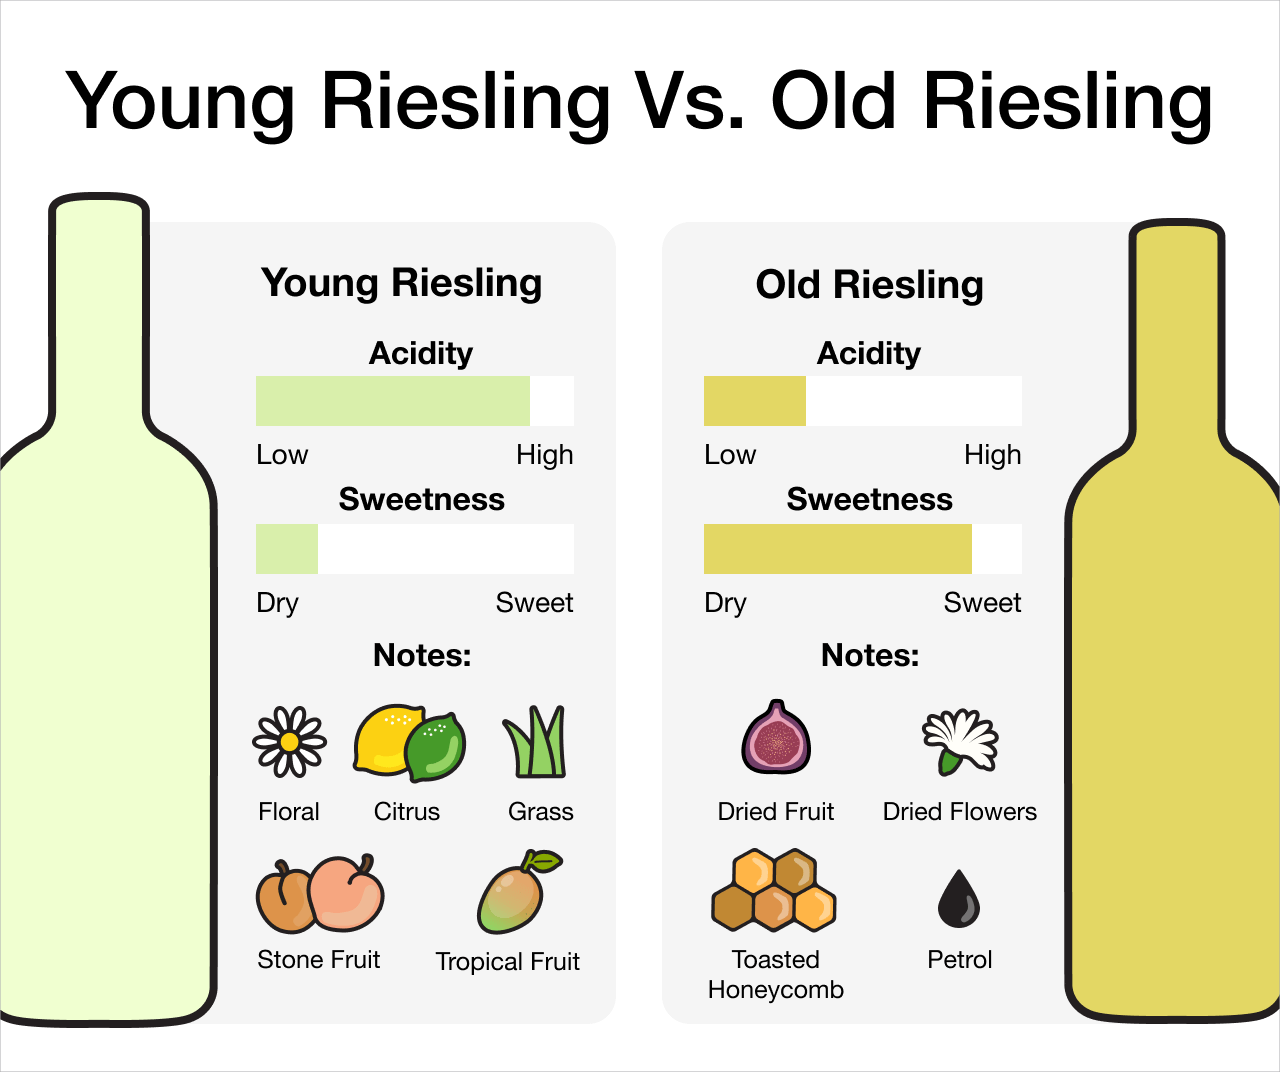 Young Riesling Vs. Old Riesling